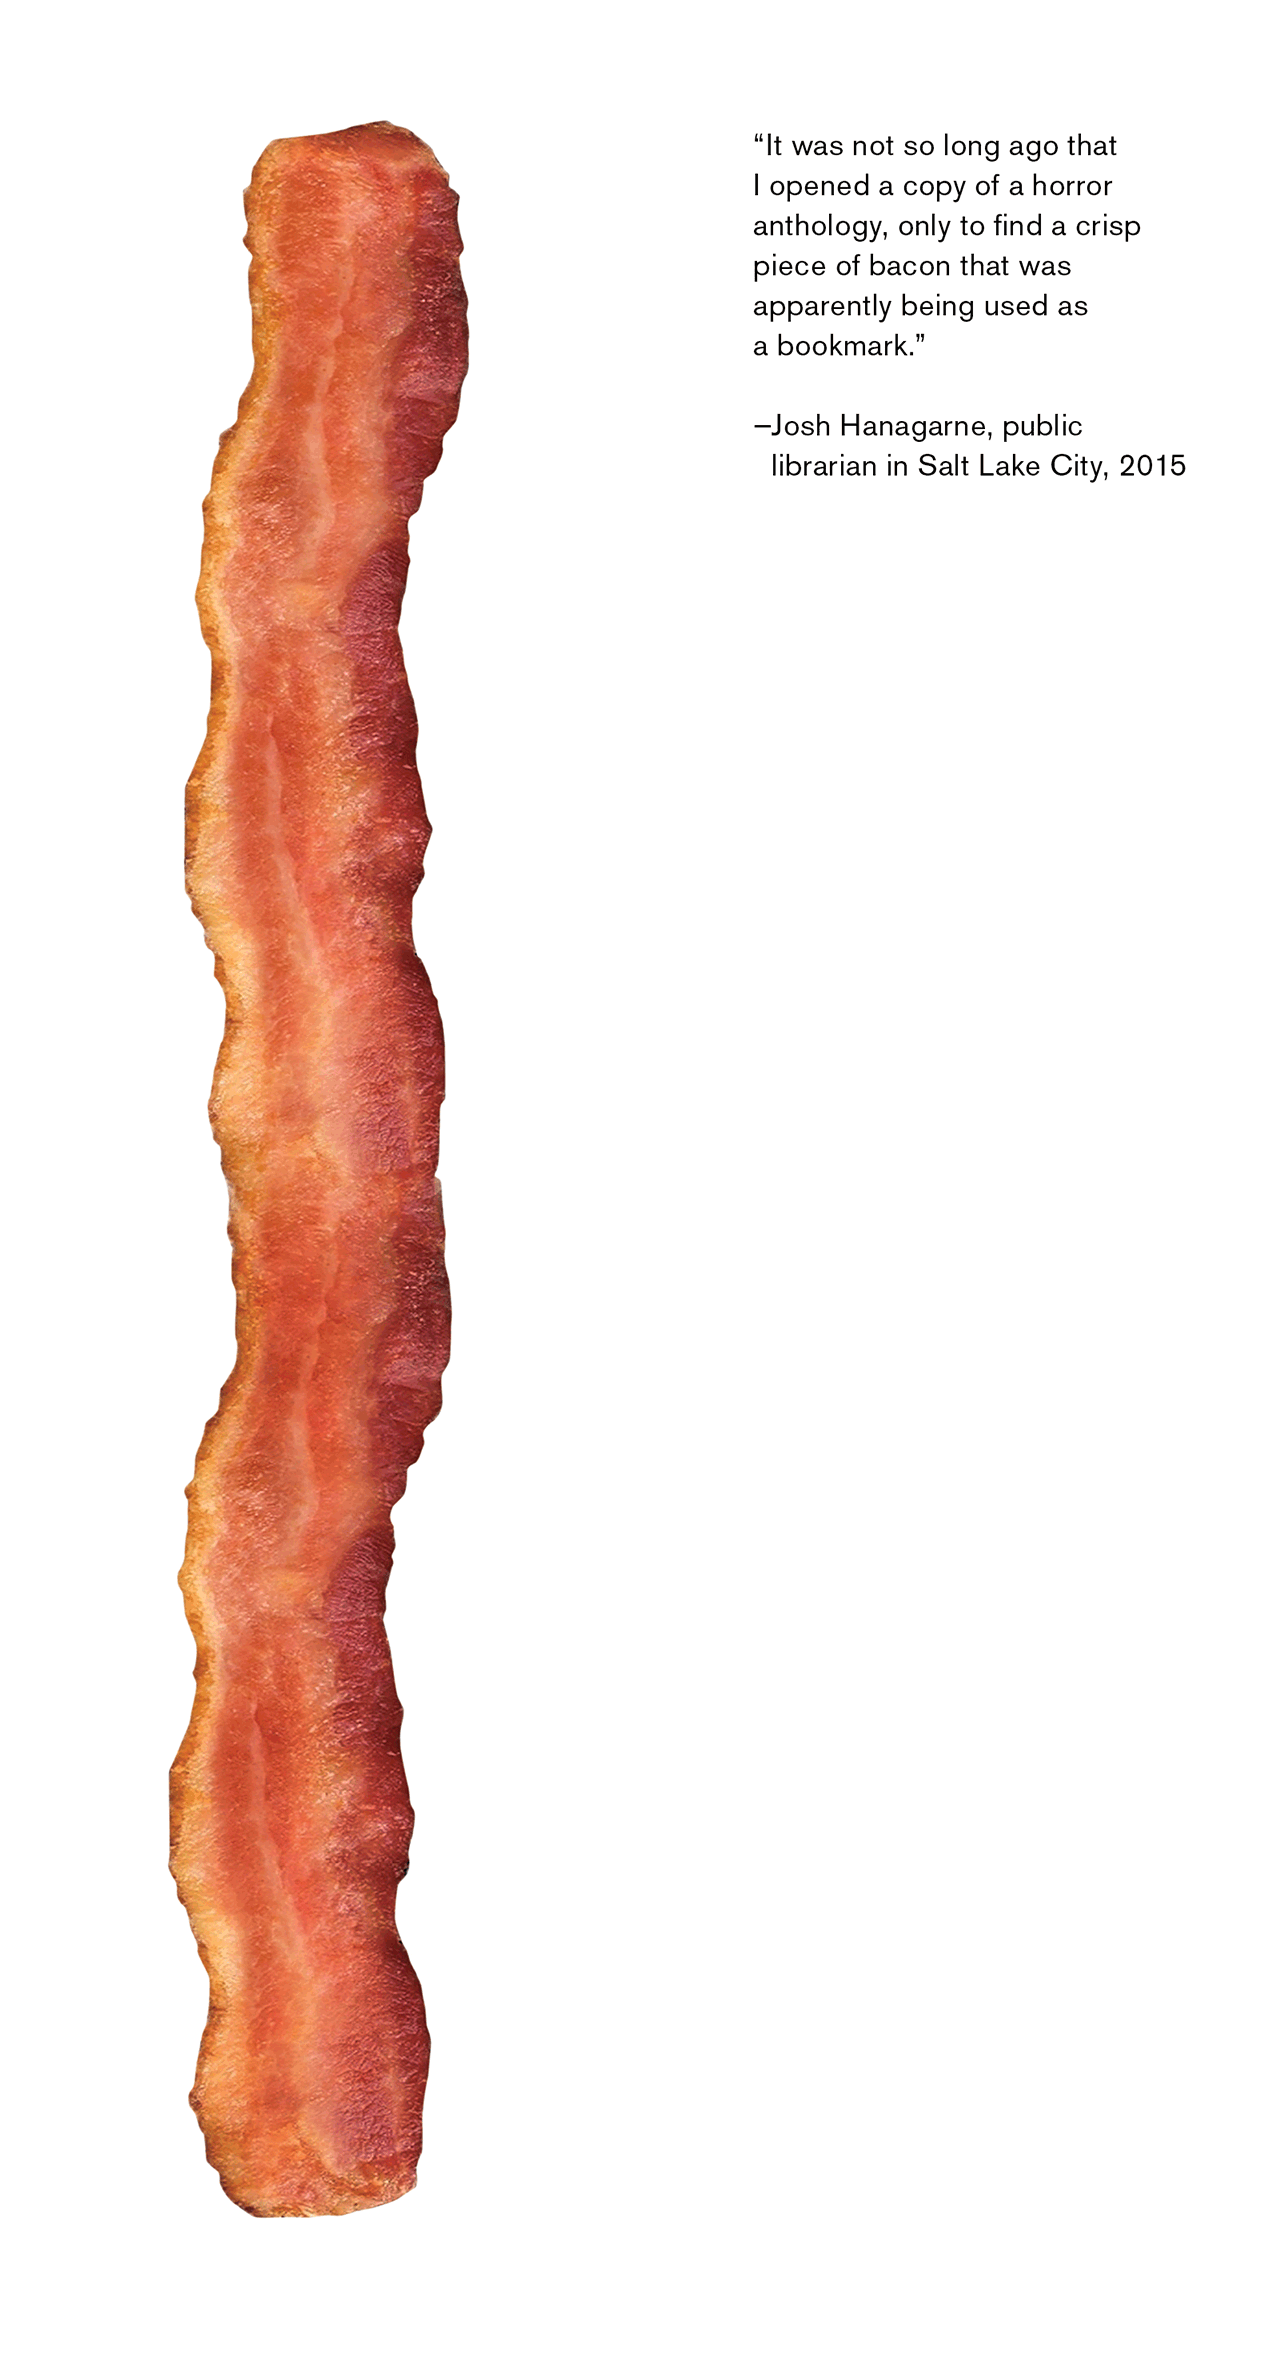 The front and back of a bookmark. The front depicts an image of a piece of bacon. The back features a quote that reads “‘It was not so long ago that I opened a copy of a horror anthology, only to find a crisp piece of bacon that was apparently being used as a bookmark.’ – John Hanagarne, public librarian in Salt Lake City, twenty fifteen.”